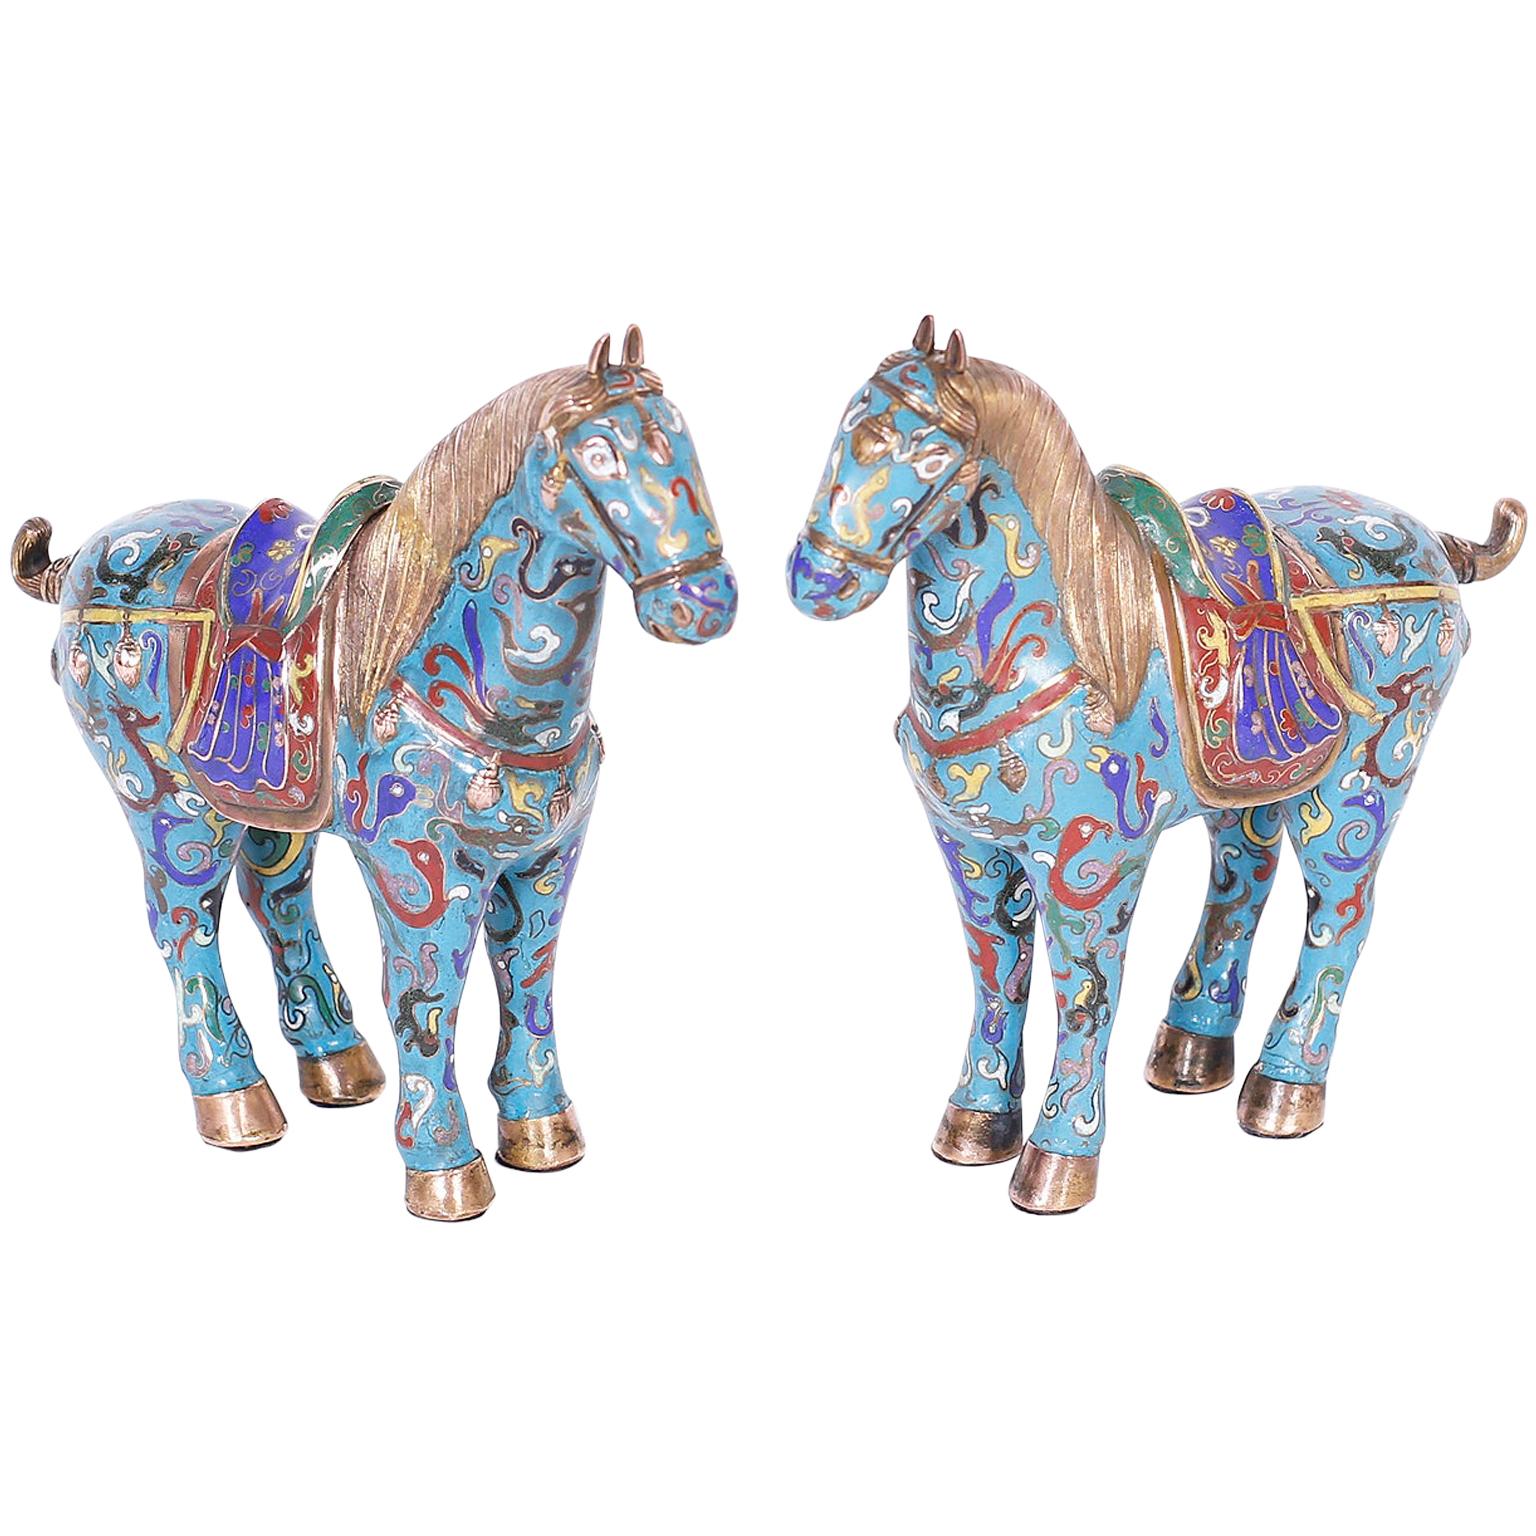 Pair of Chinese Cloisonné Horses